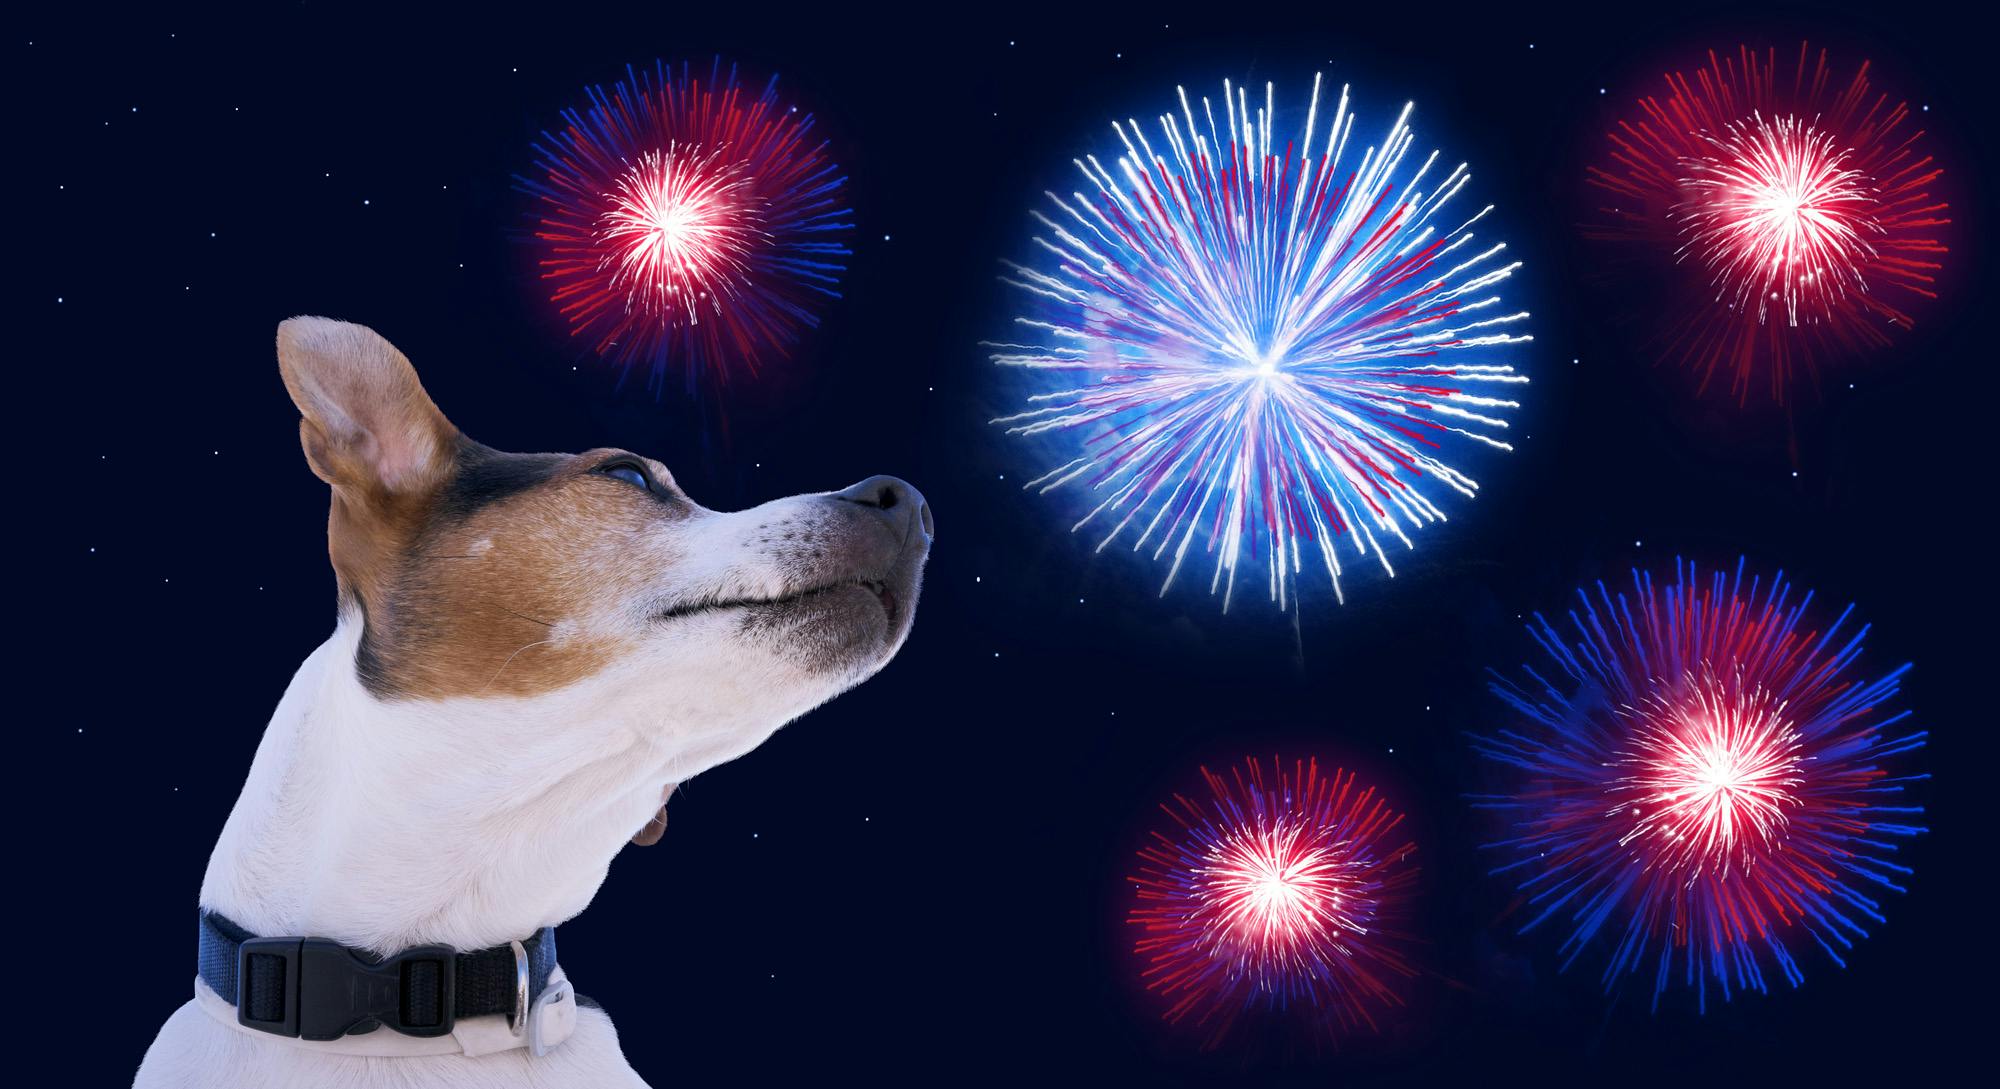 Jack Russell looking back toward the fireworks